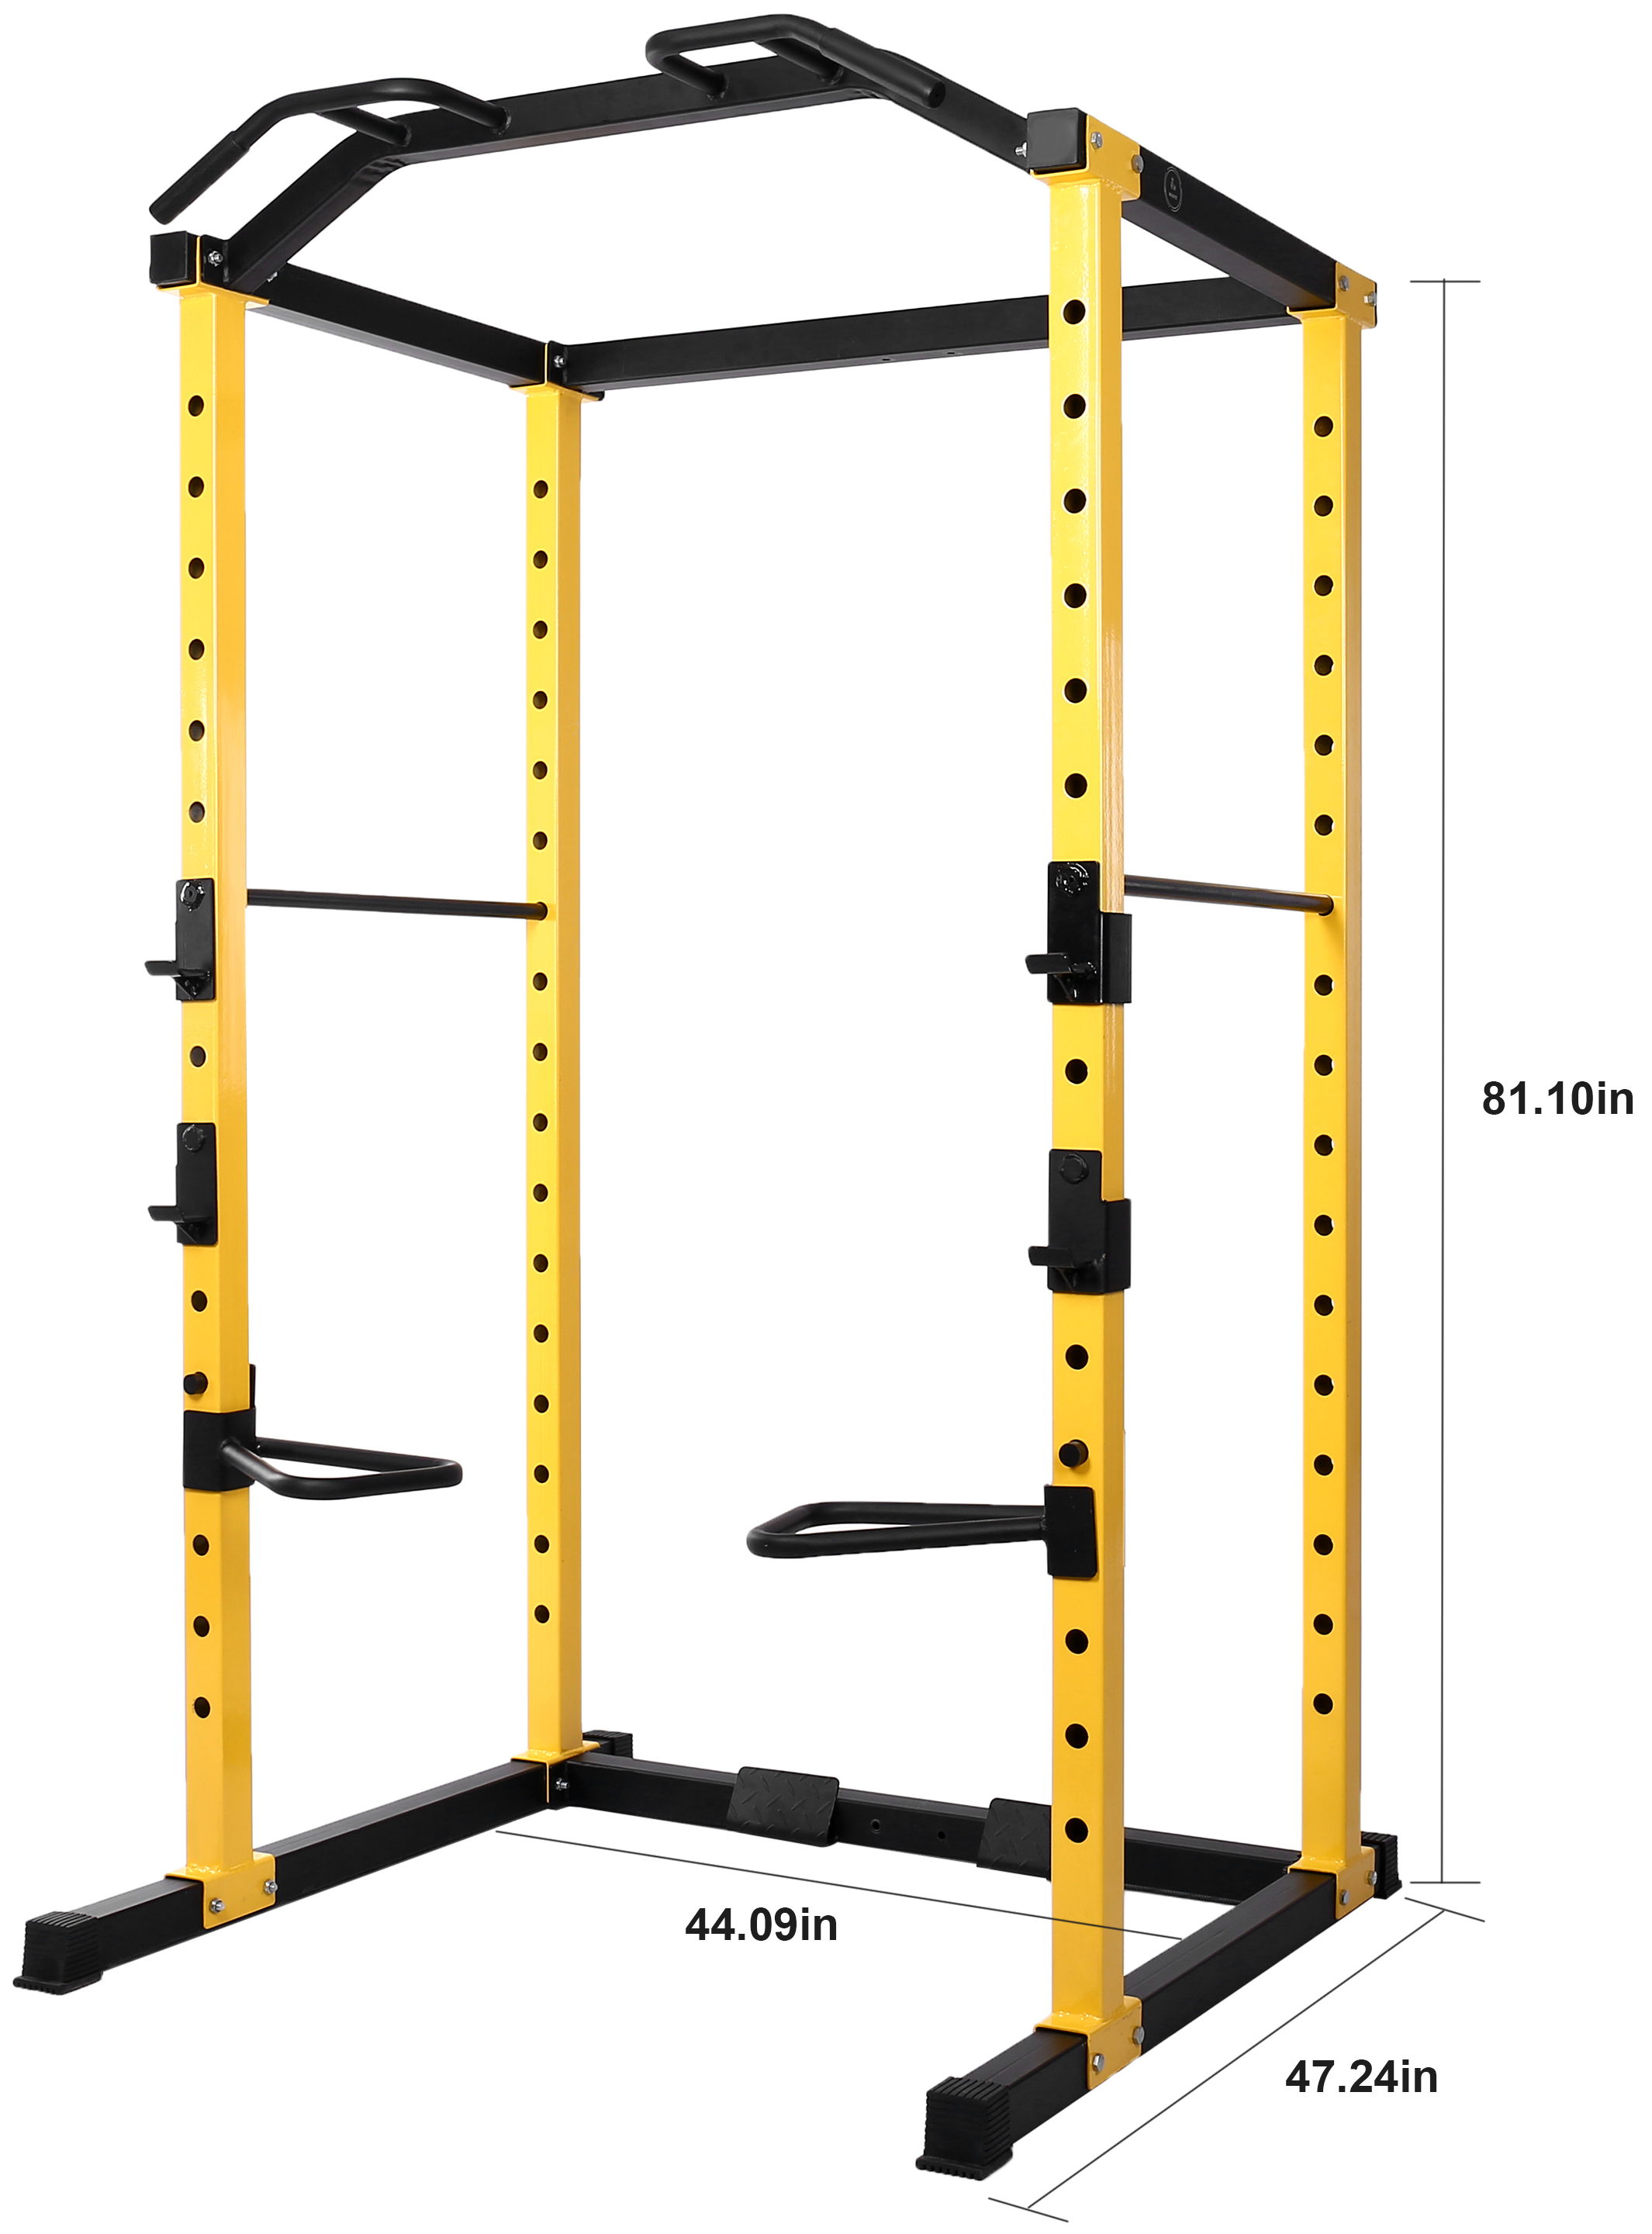 HulkFit Multi-Function Adjustable Power Cage with J-Hooks, Safety Bars or Safety Straps, Power Cage Only, Yellow - image 3 of 5